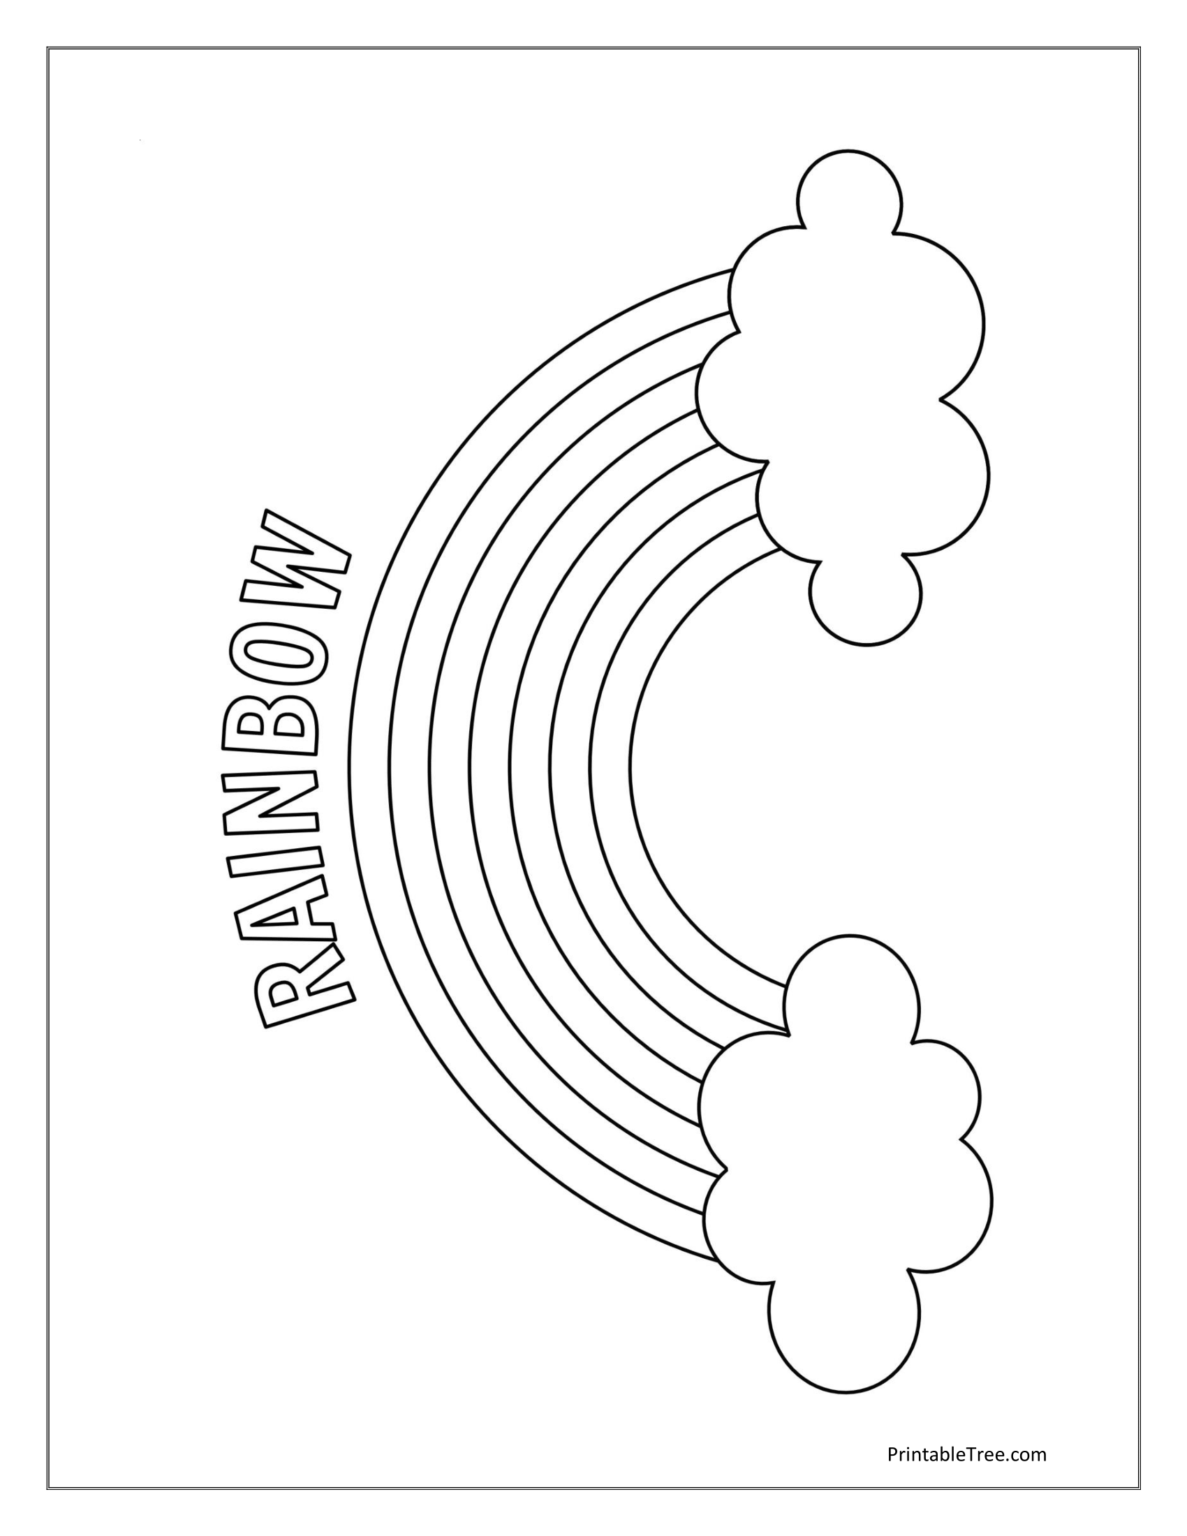 Free Printable Rainbow Coloring Pages PDF for Kids & Adults